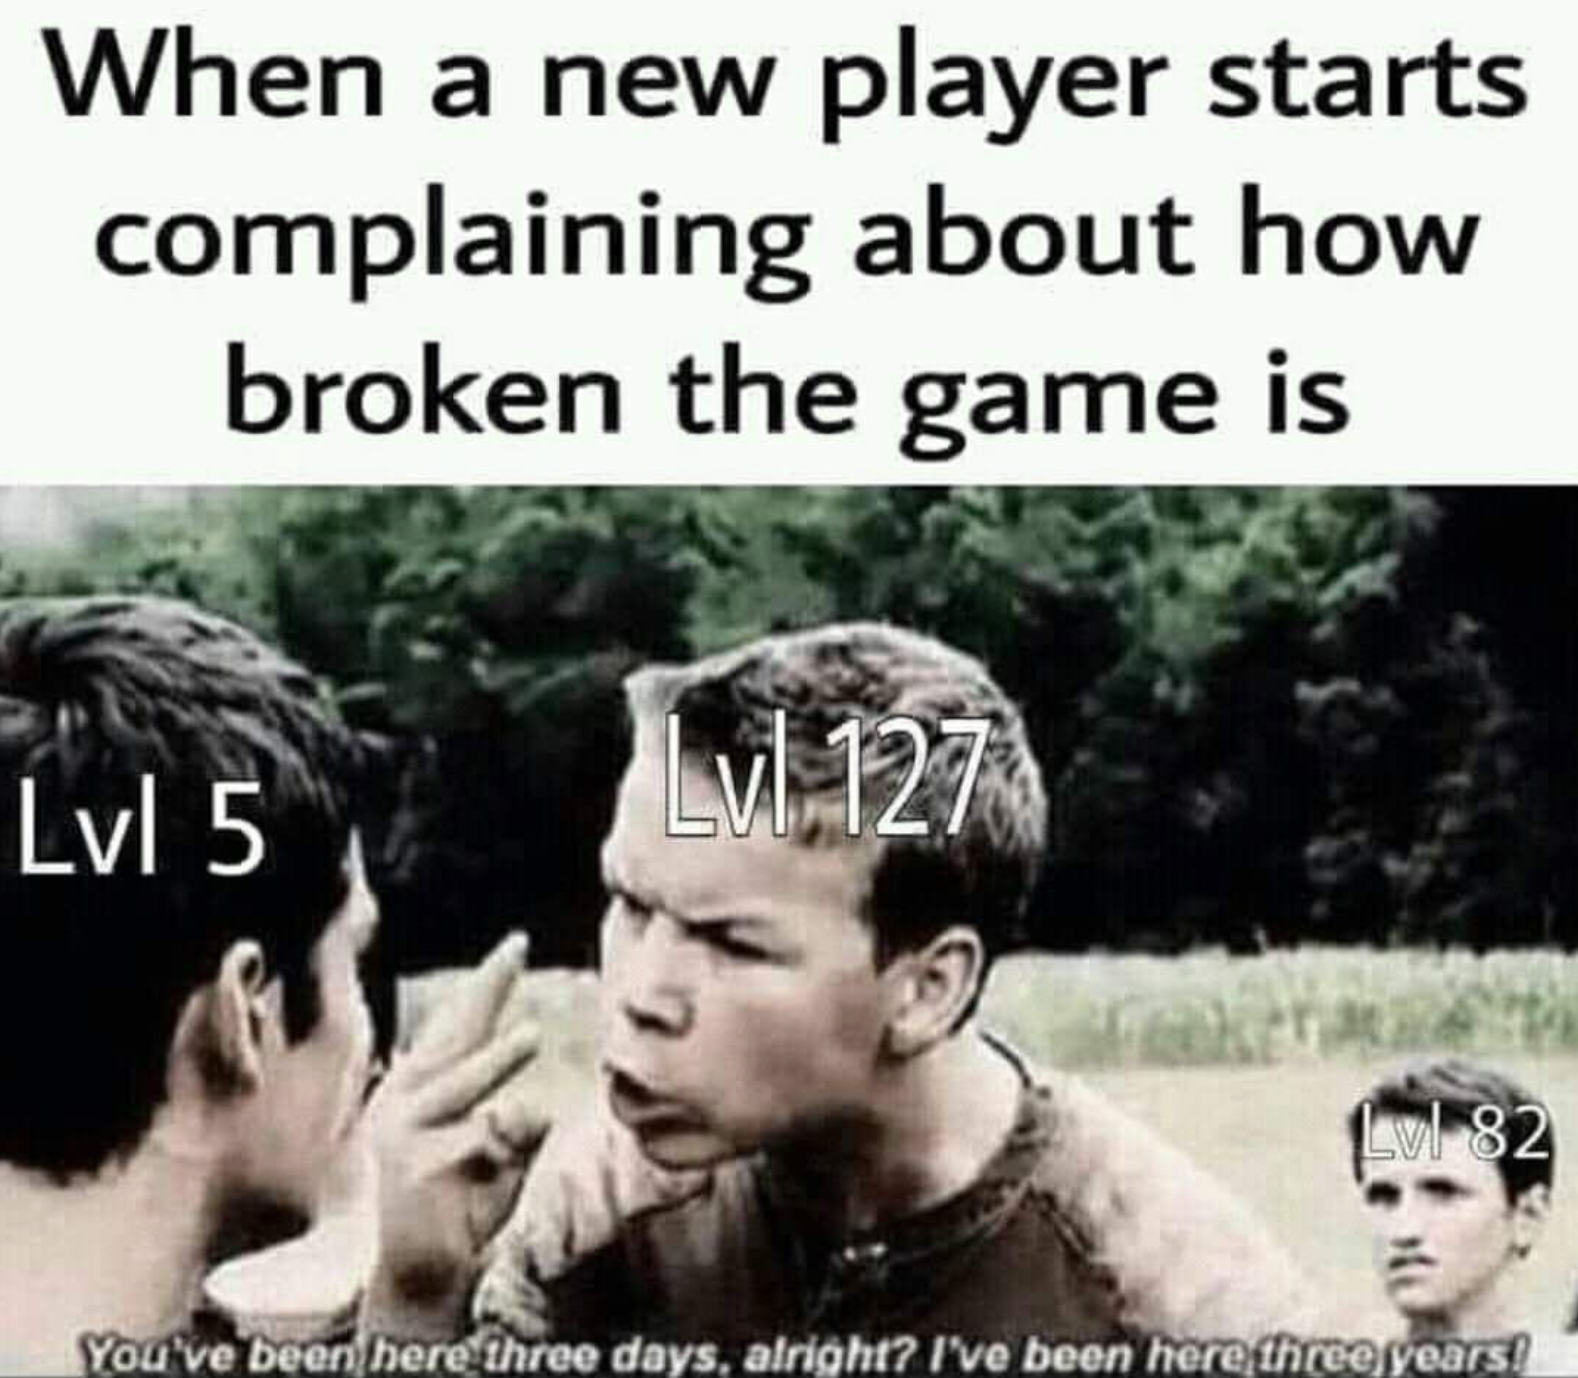 funny gaming memes - maze runner memes - When a new player starts complaining about how broken the game is Lvl 5 Lvl 127 Lvl 82 You've been here three days, alright? I've been here three years! ,